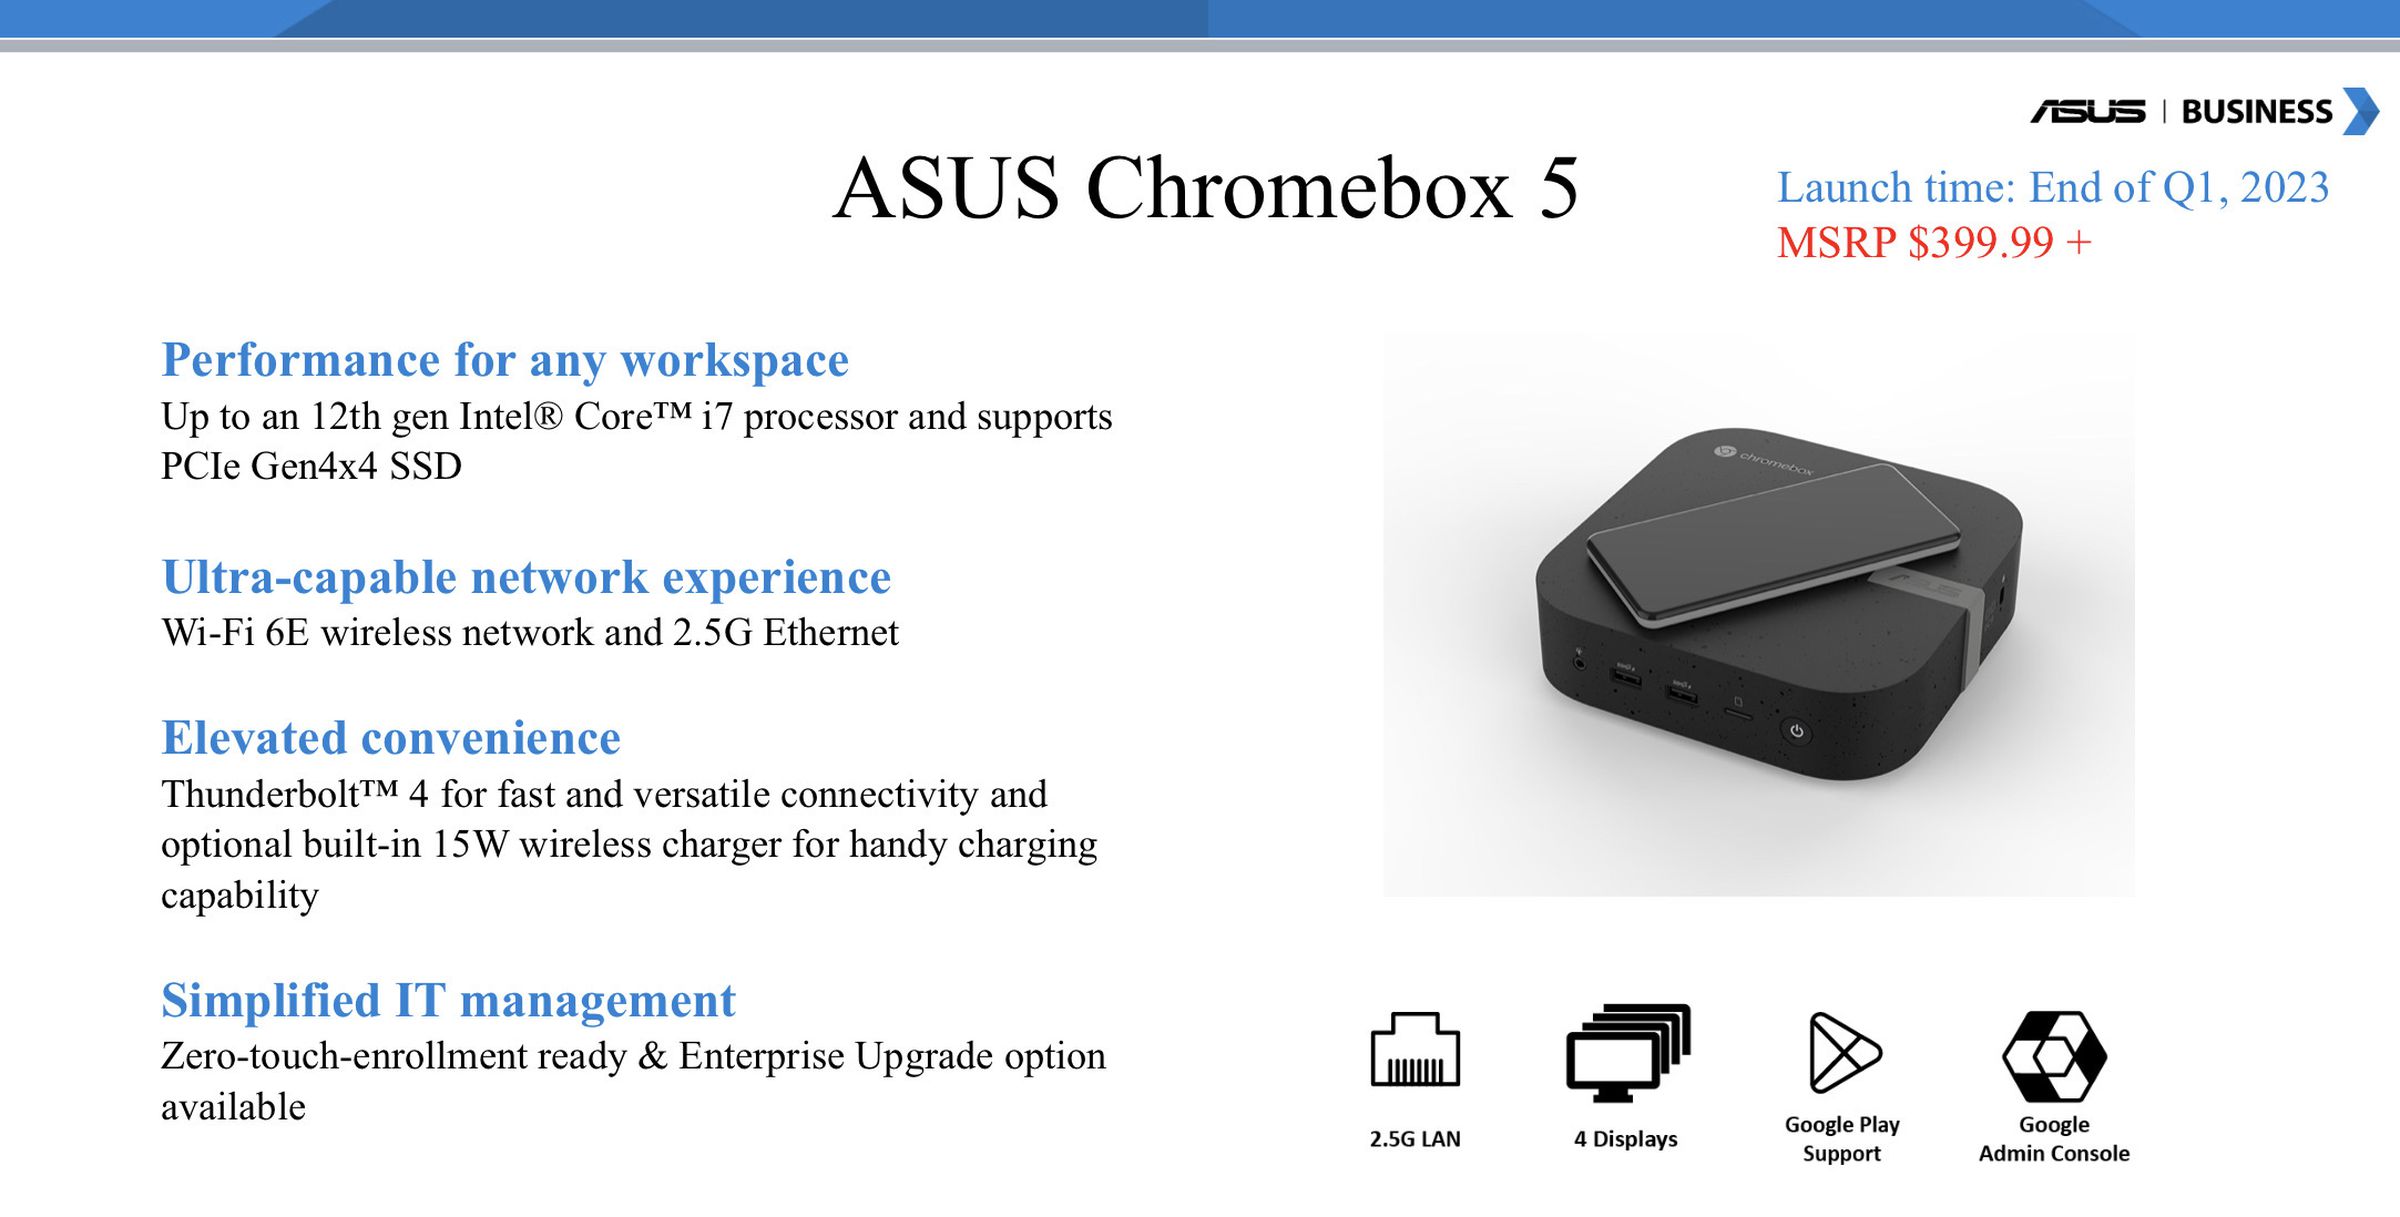 The Asus Chromebox 5 will start at $400.